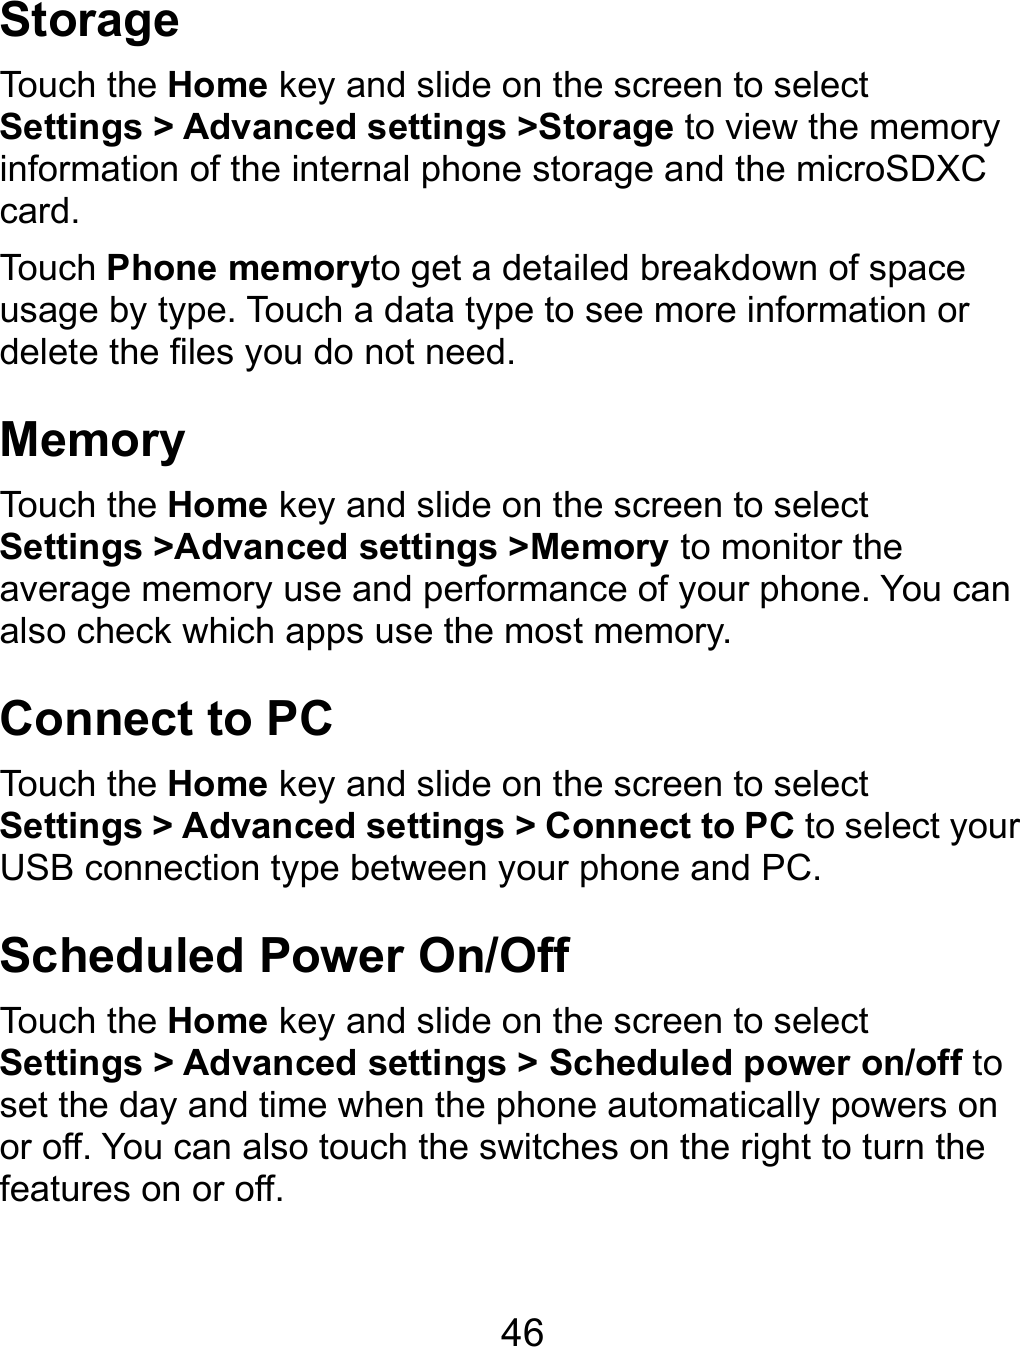  46 Storage Touch the Home key and slide on the screen to select Settings &gt; Advanced settings &gt;Storage to view the memory information of the internal phone storage and the microSDXC card. Touch Phone memoryto get a detailed breakdown of space usage by type. Touch a data type to see more information or delete the files you do not need. Memory Touch the Home key and slide on the screen to select Settings &gt;Advanced settings &gt;Memory to monitor the average memory use and performance of your phone. You can also check which apps use the most memory. Connect to PC Touch the Home key and slide on the screen to select Settings &gt; Advanced settings &gt; Connect to PC to select your USB connection type between your phone and PC.   Scheduled Power On/Off Touch the Home key and slide on the screen to select Settings &gt; Advanced settings &gt; Scheduled power on/off to set the day and time when the phone automatically powers on or off. You can also touch the switches on the right to turn the features on or off.  